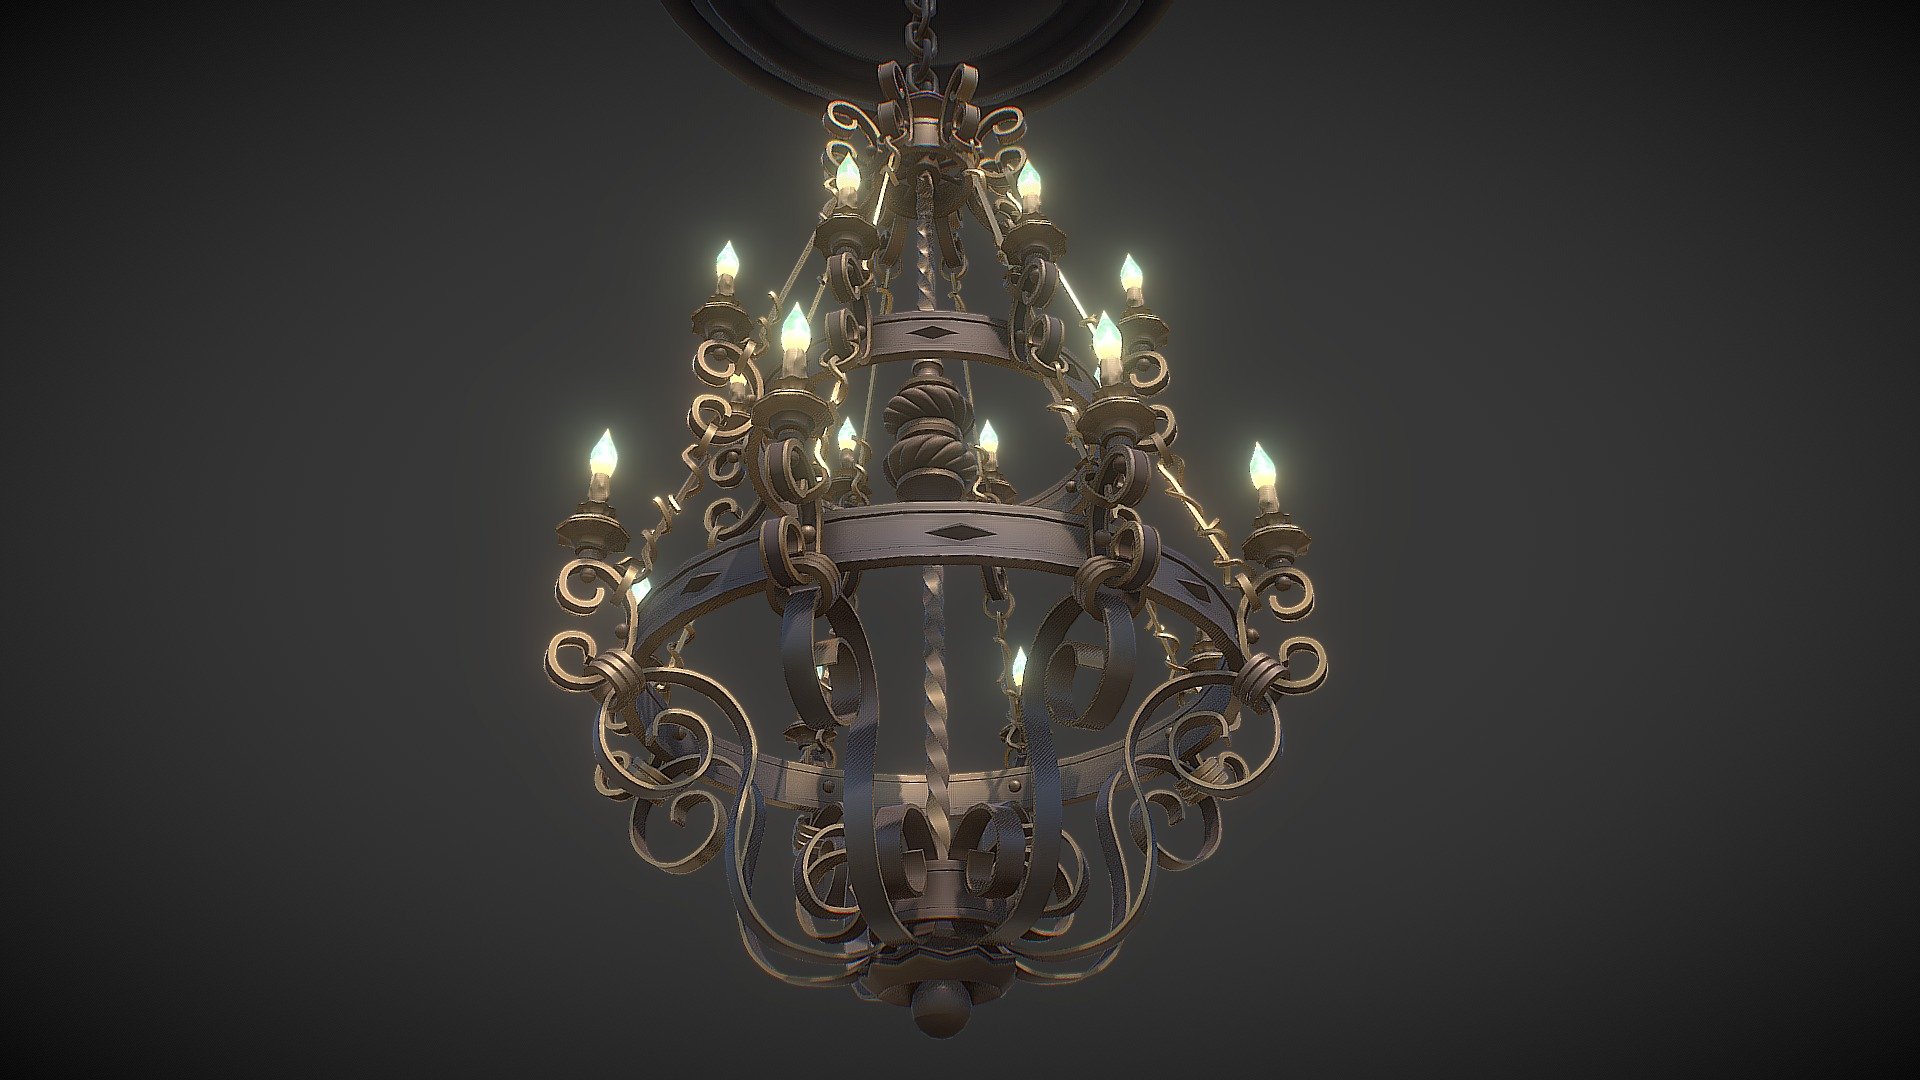 Hello. This is a high definition quality polygon of a Forged_chandelier 3D Model with PBR textures. Extremely detailed and realistic. Suitable for movie prop, architectural visualizations, advertising renders and other. The archive includes Obj and FBX, Marmoset scene, textures for the Unity: Base color, Height, Metallic, Mixed AO, Normal_OpenGL, Roughness. And also included in the archive textures for UE: BaseColor, Normal, OcclusionRoughnessMetallic. All textures are 4k resolution. The number of materials corresponds to the number of main objects in the scene. The model contains 2 object: Forged_chandelier, Forged_chandelier_light. If you need, we will make a file of this model for 3D printing especially for you 3d model